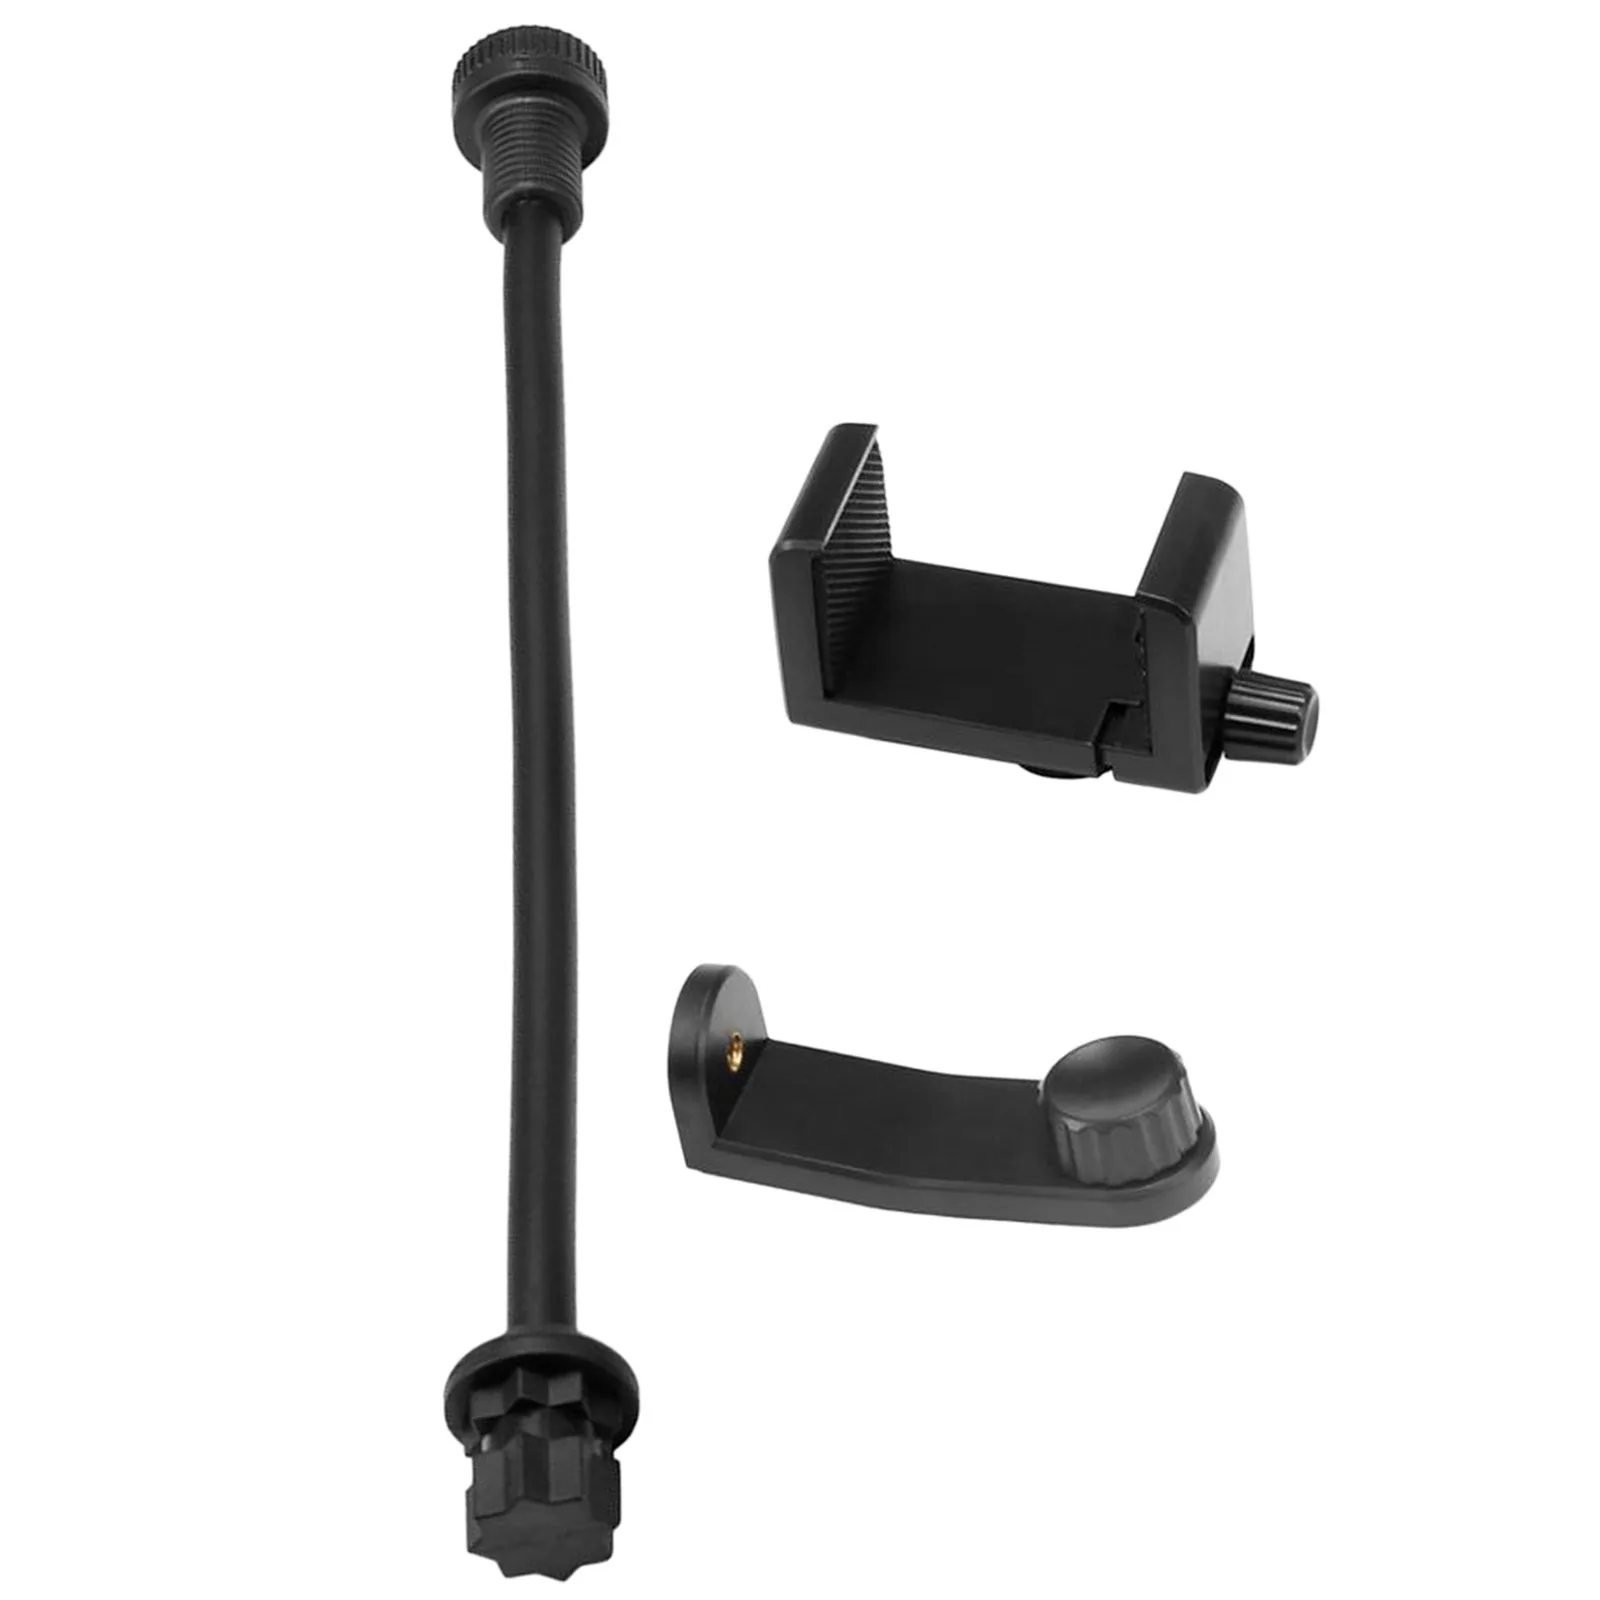 300mm Long Arm Kayak Dinghy Mobile Phone Mount Clamp Holder Fit 2.0-3.5` Width Phones Water Sports Accessories